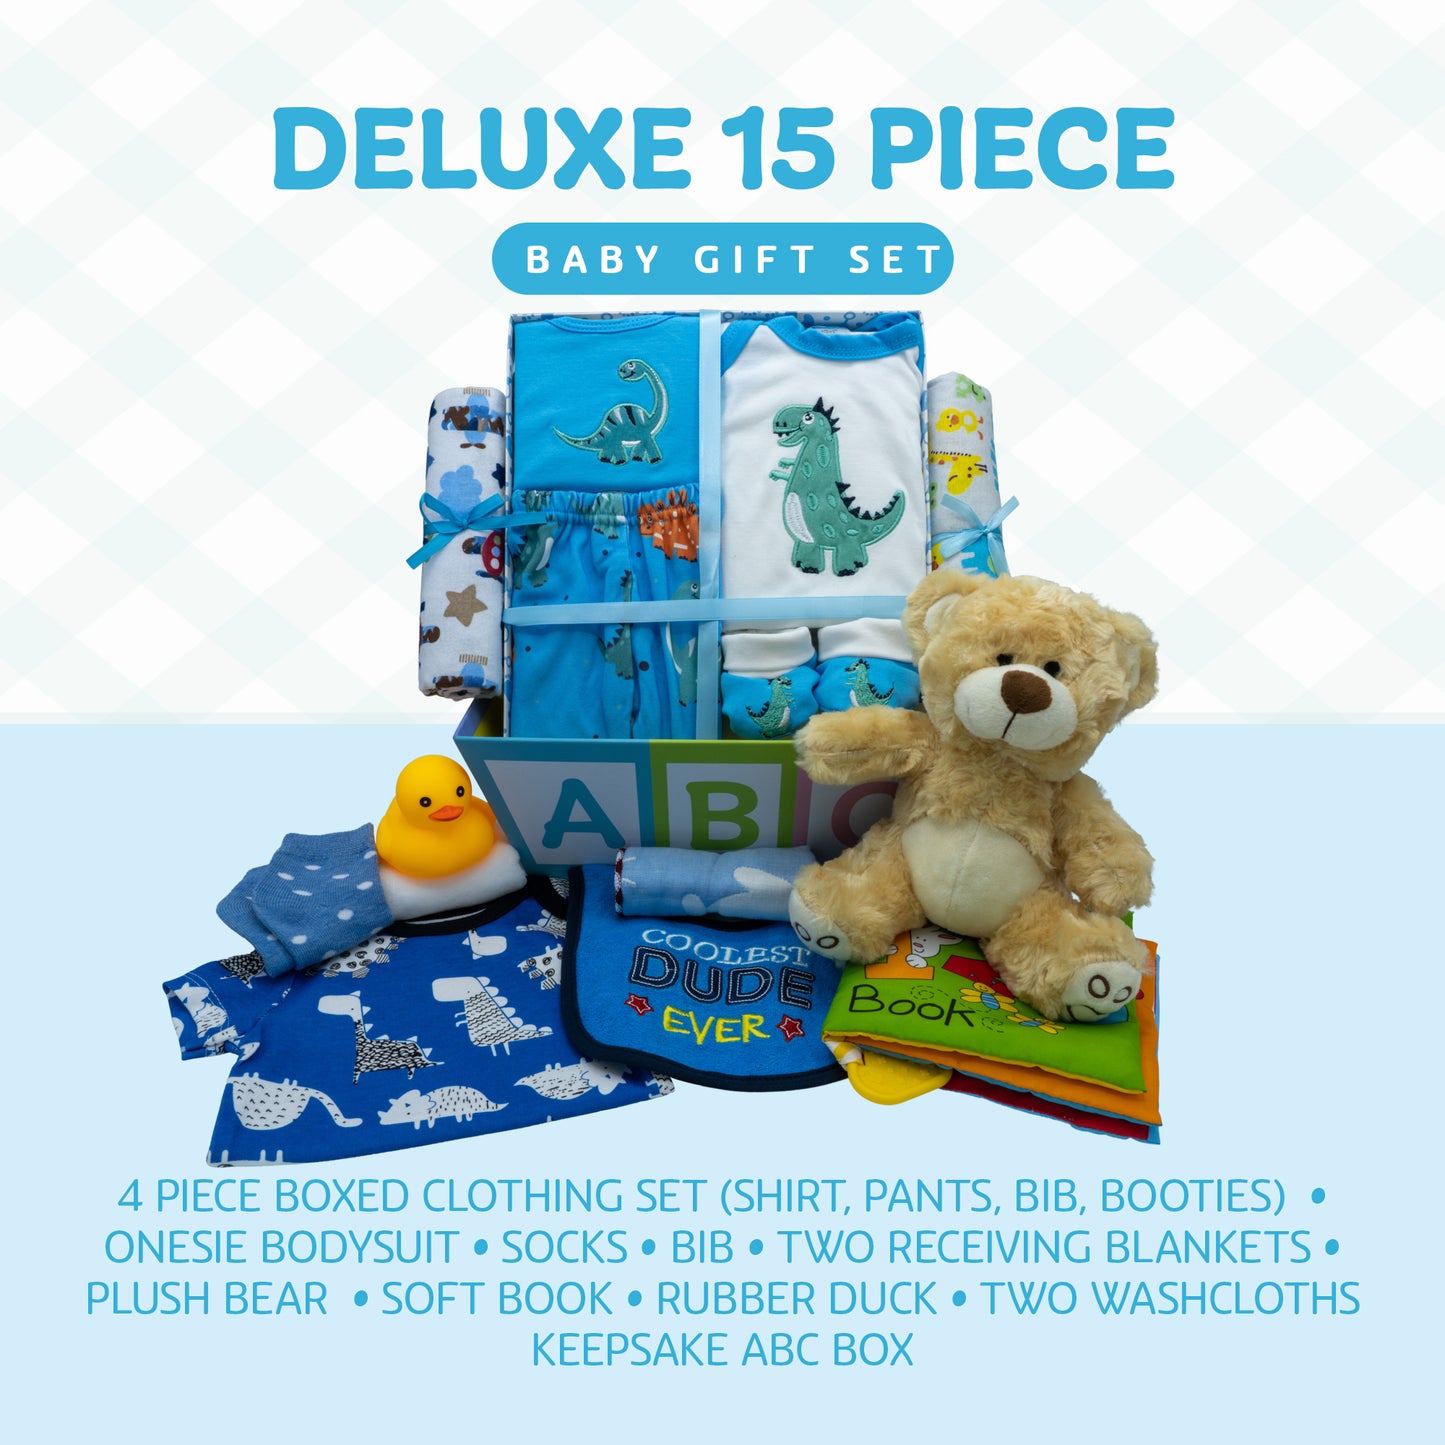 Sweet New Baby Boy Gift Basket, Baby Layette Set with Adorable New Baby Essentials, Newborn Baby Gift Set Basket for Expecting Moms & Baby Showers, Baby Dinosaur Clothes, Blue